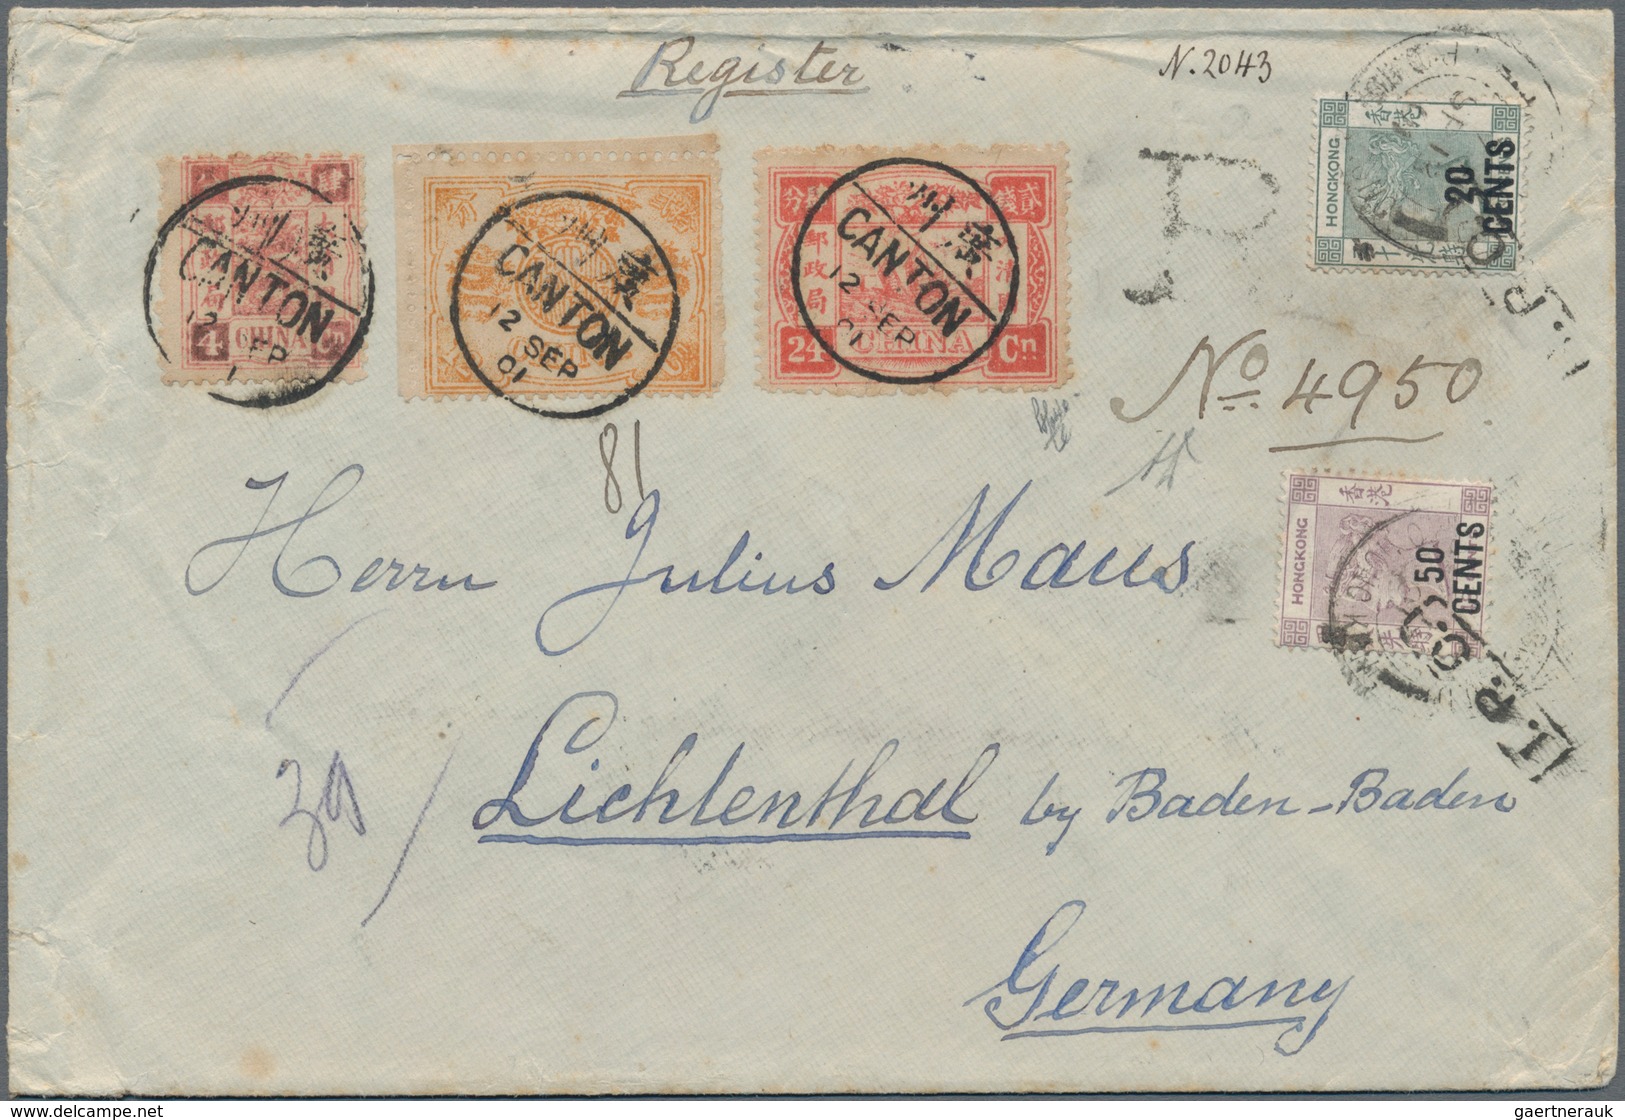 China: 1894, Dowager 4 Ca. Rose-pink, 12 Ca. Brown-orange And 24 Ca. Rose-carmine Tied By Bisected B - 1912-1949 République